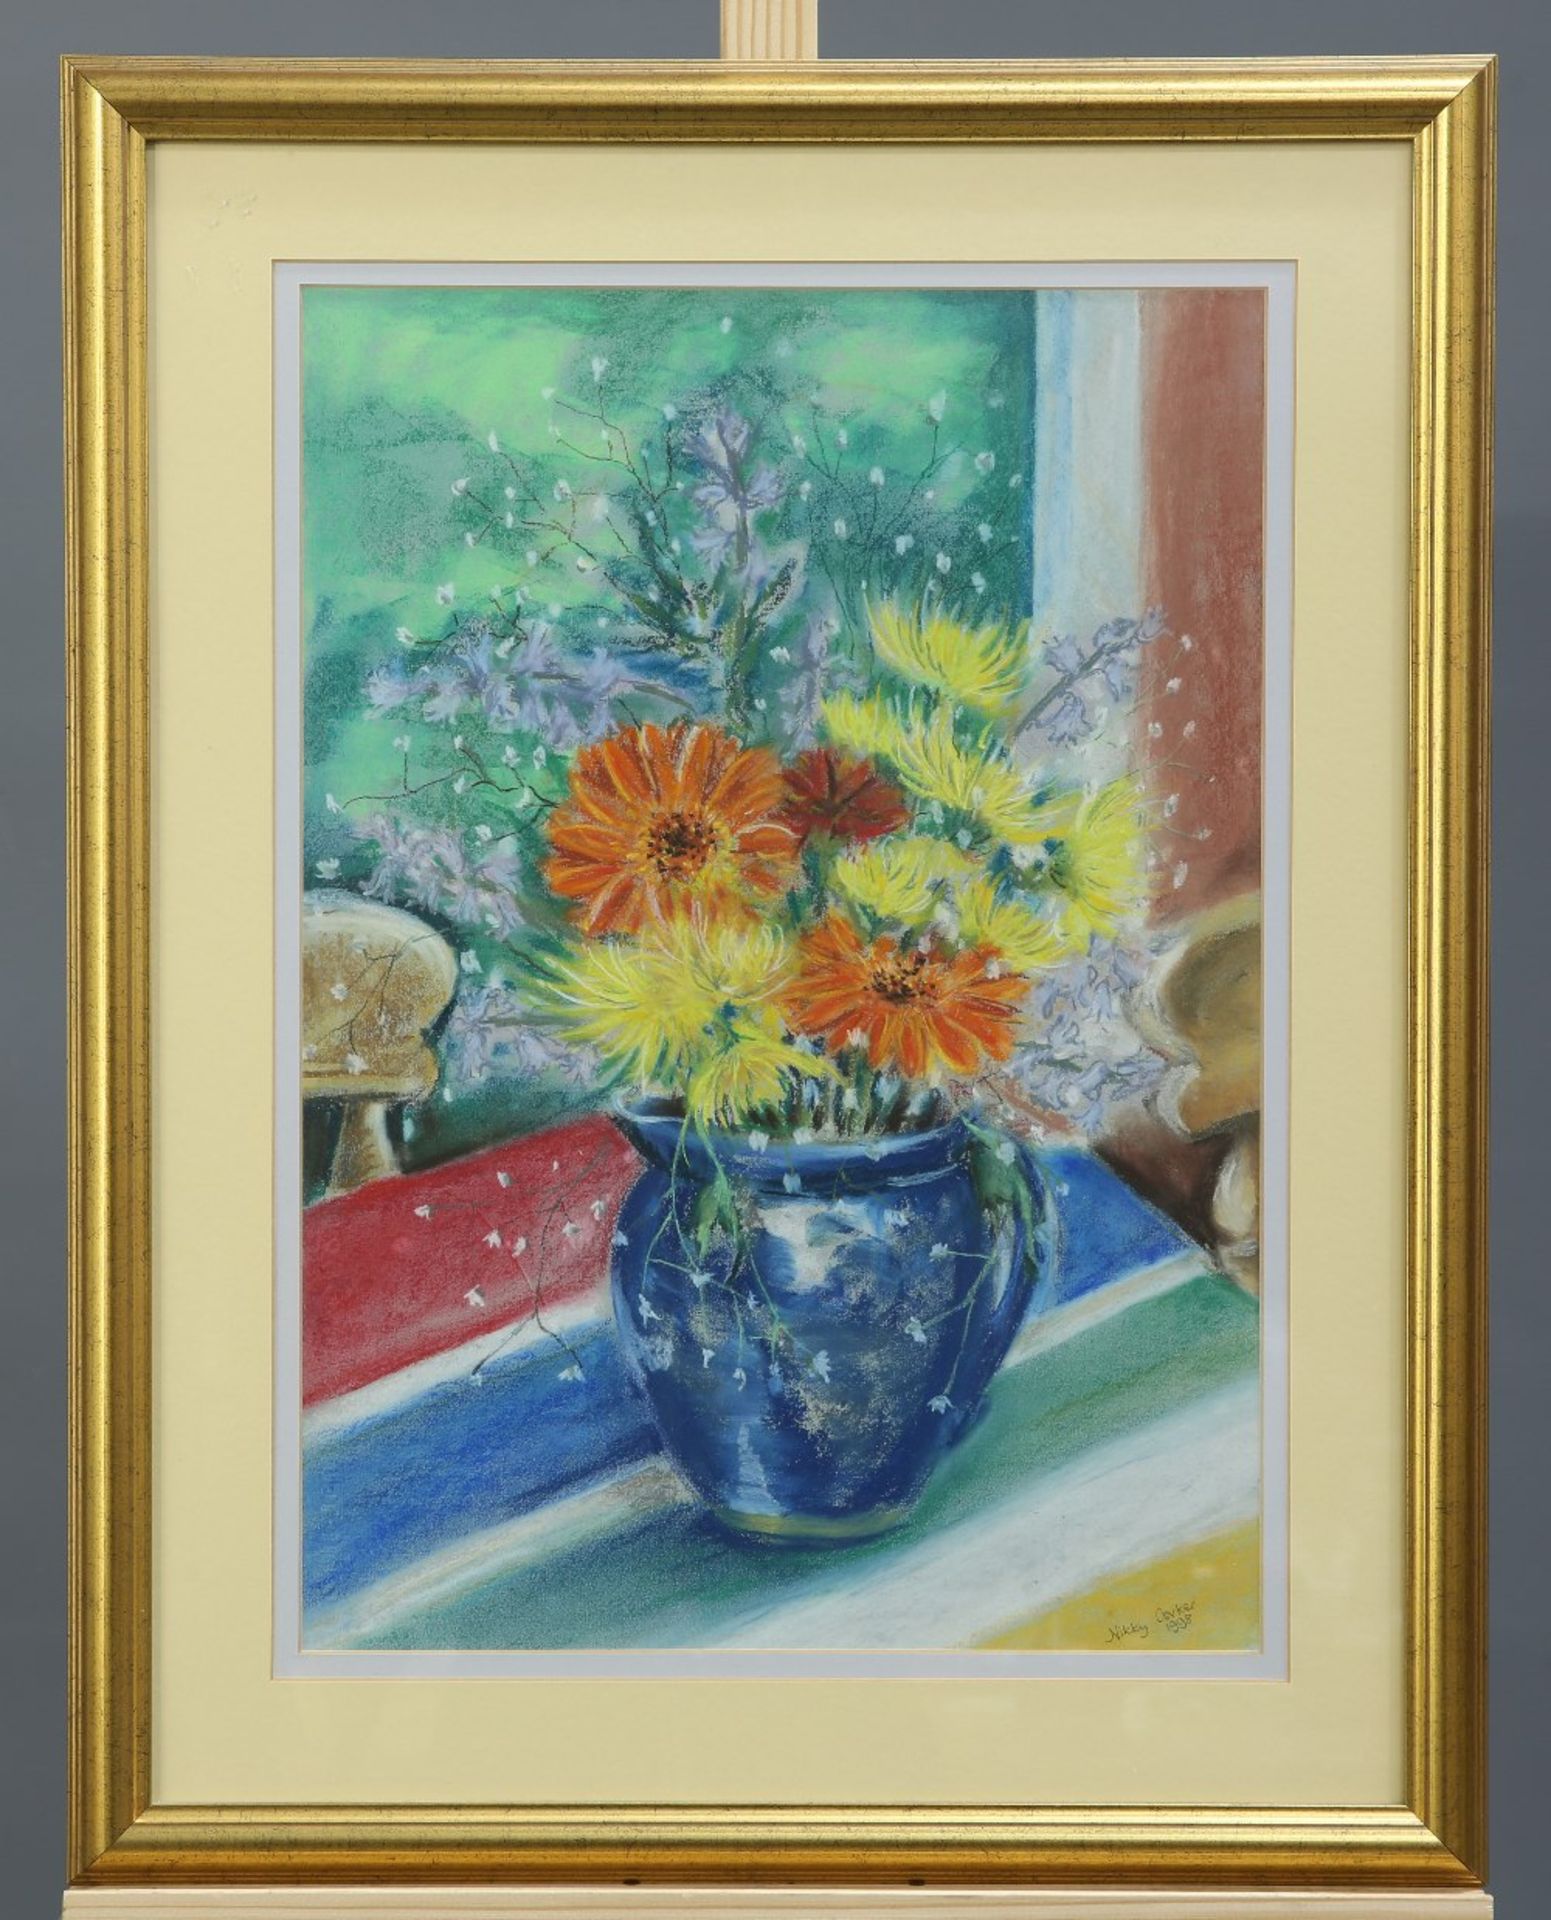 NIKKY CORKER (20TH CENTURY), STILL LIFE OF A VASE OF FLOWERS